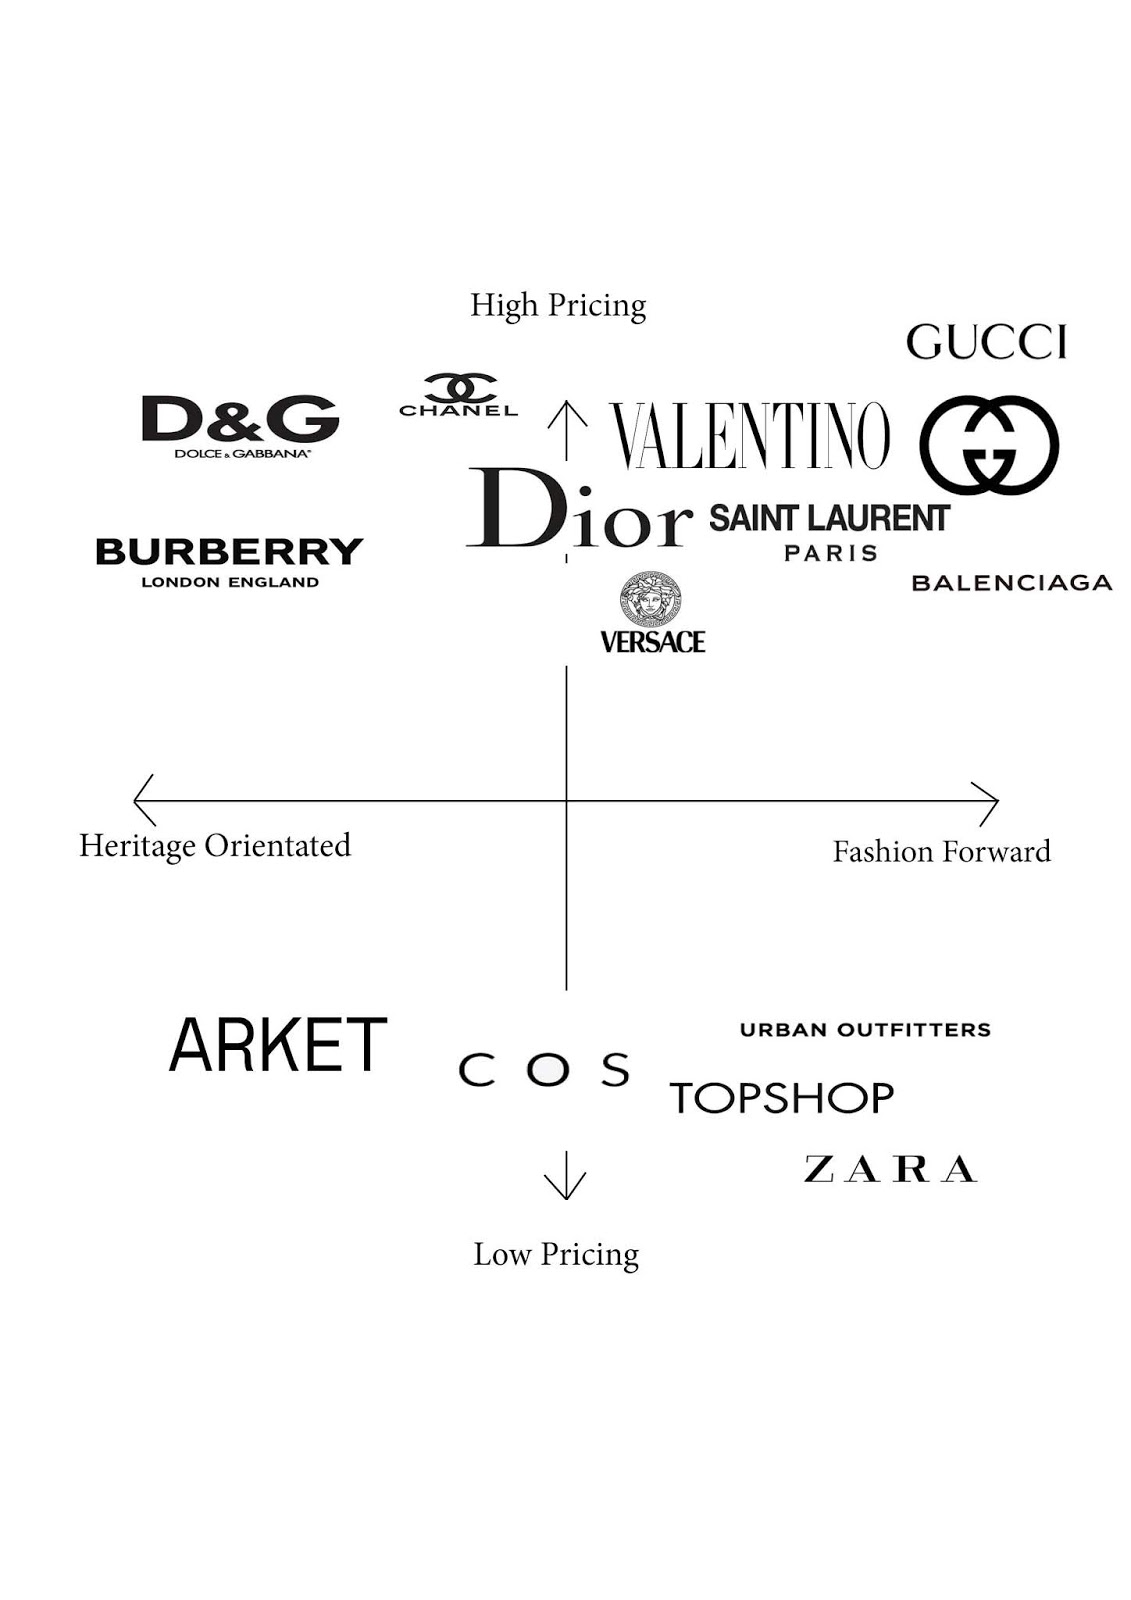 Brand Positioning Map